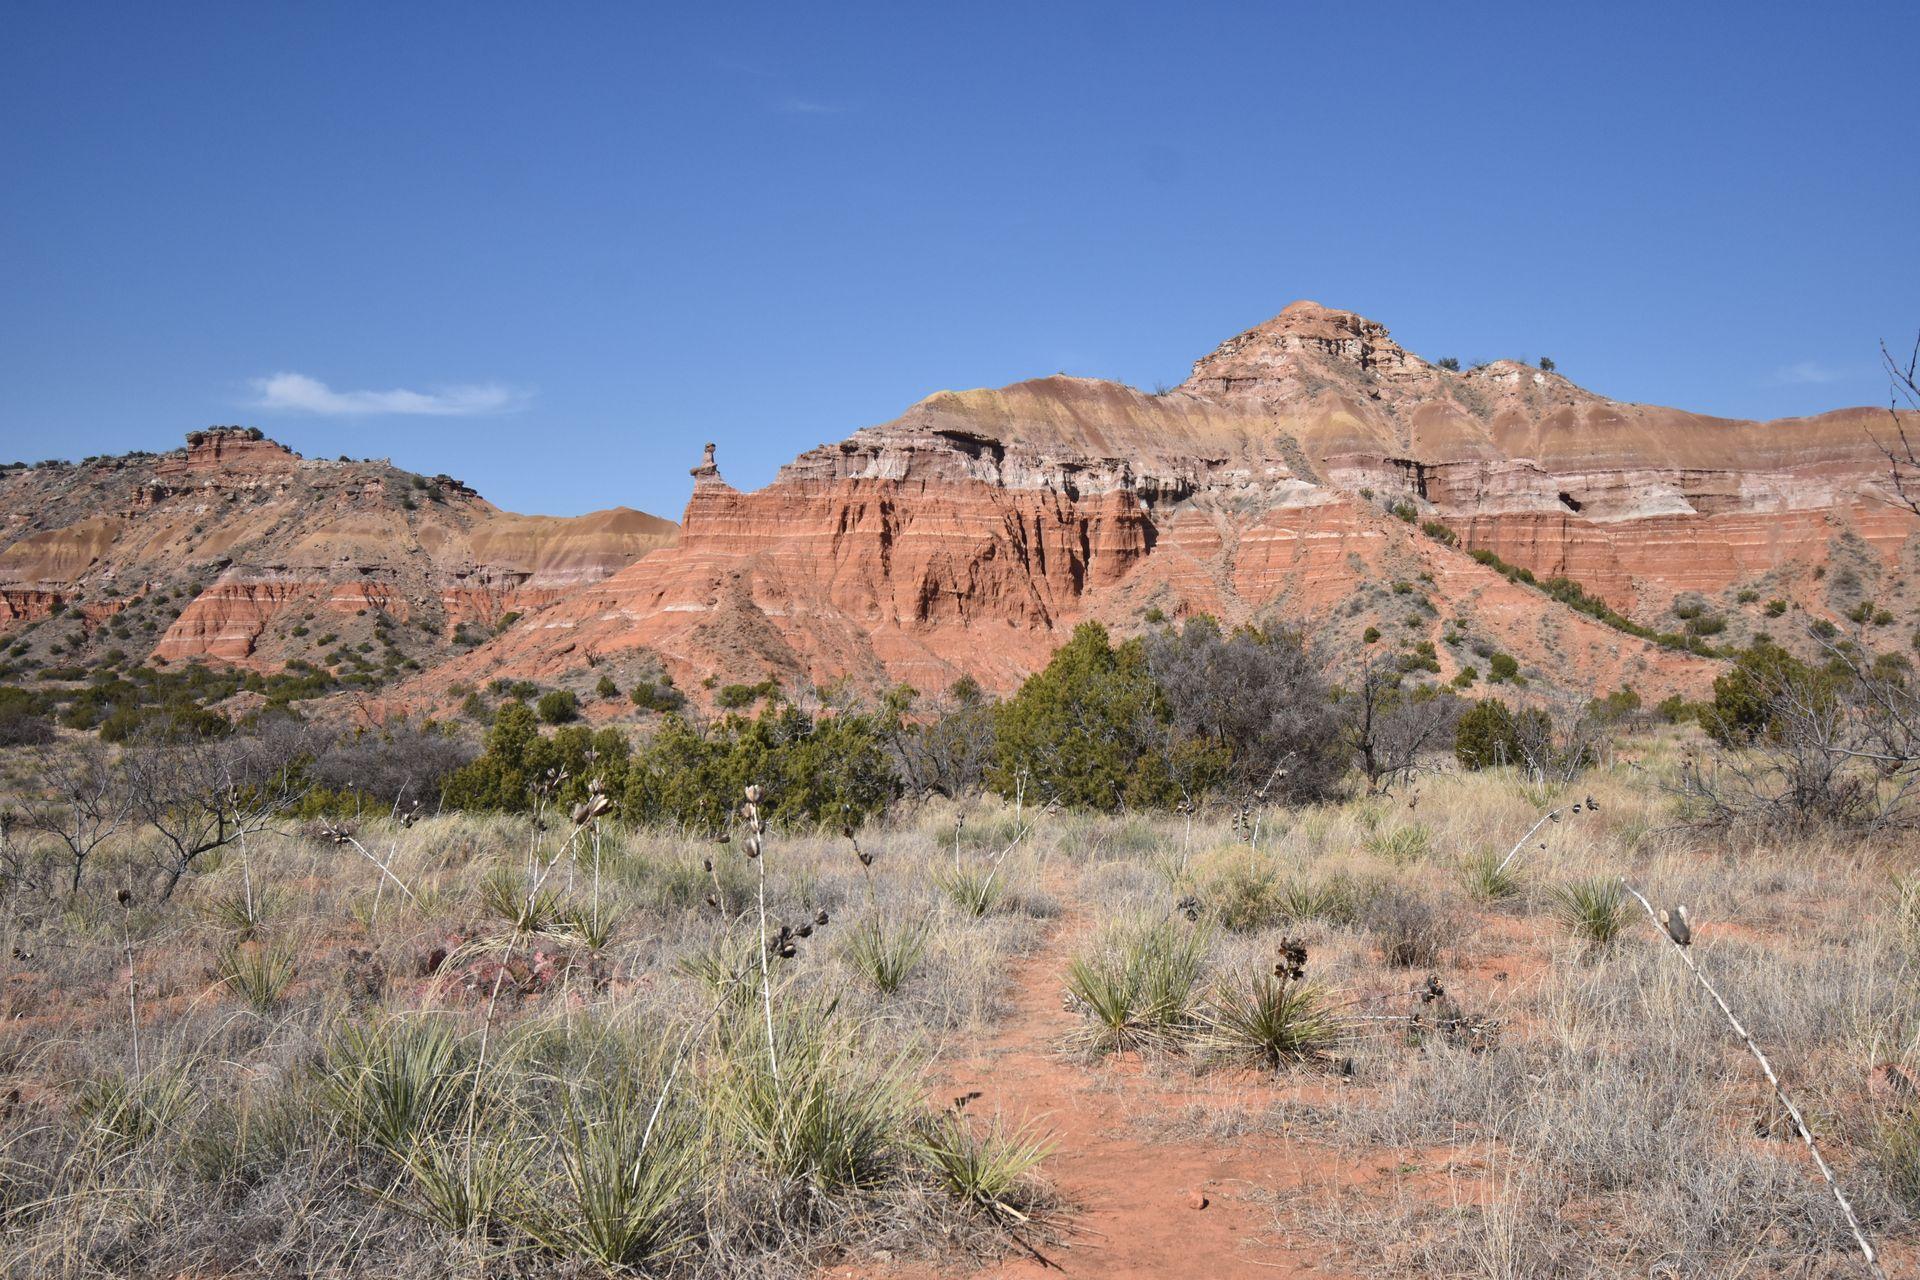 A tall orange rock face with some stripes of white at Palo Duro Canyon State Park.